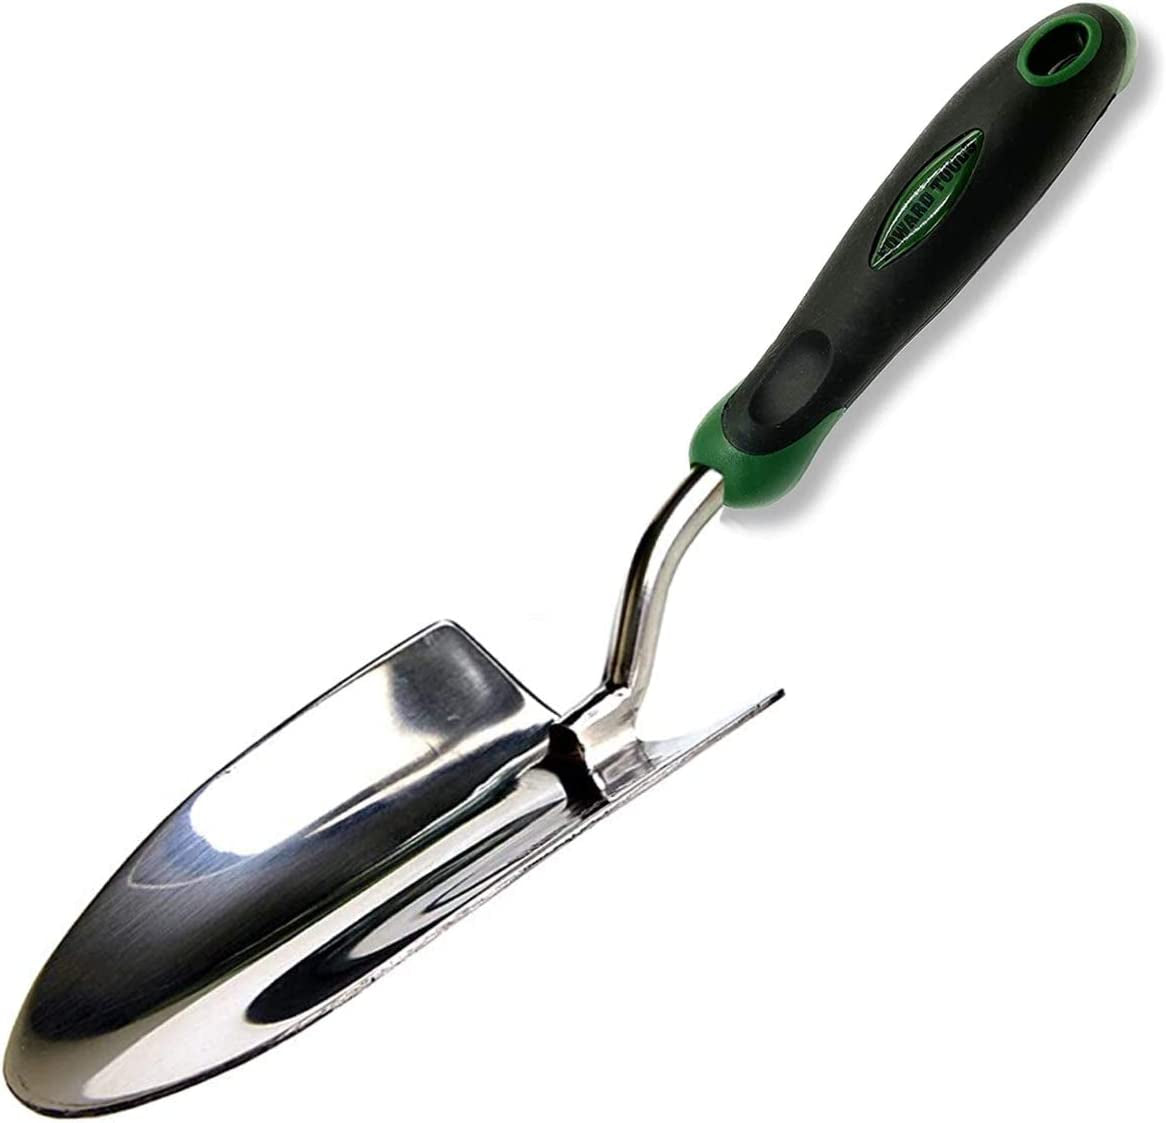 Edward Tools, Edward Tools Bend-Proof Garden Trowel - Heavy Duty Polished Stainless Steel - Rust Resistant Oversized Garden Hand Shovel for Quicker Work - Digs through Rocky/Heavy Soils - Comfort Grip (2)